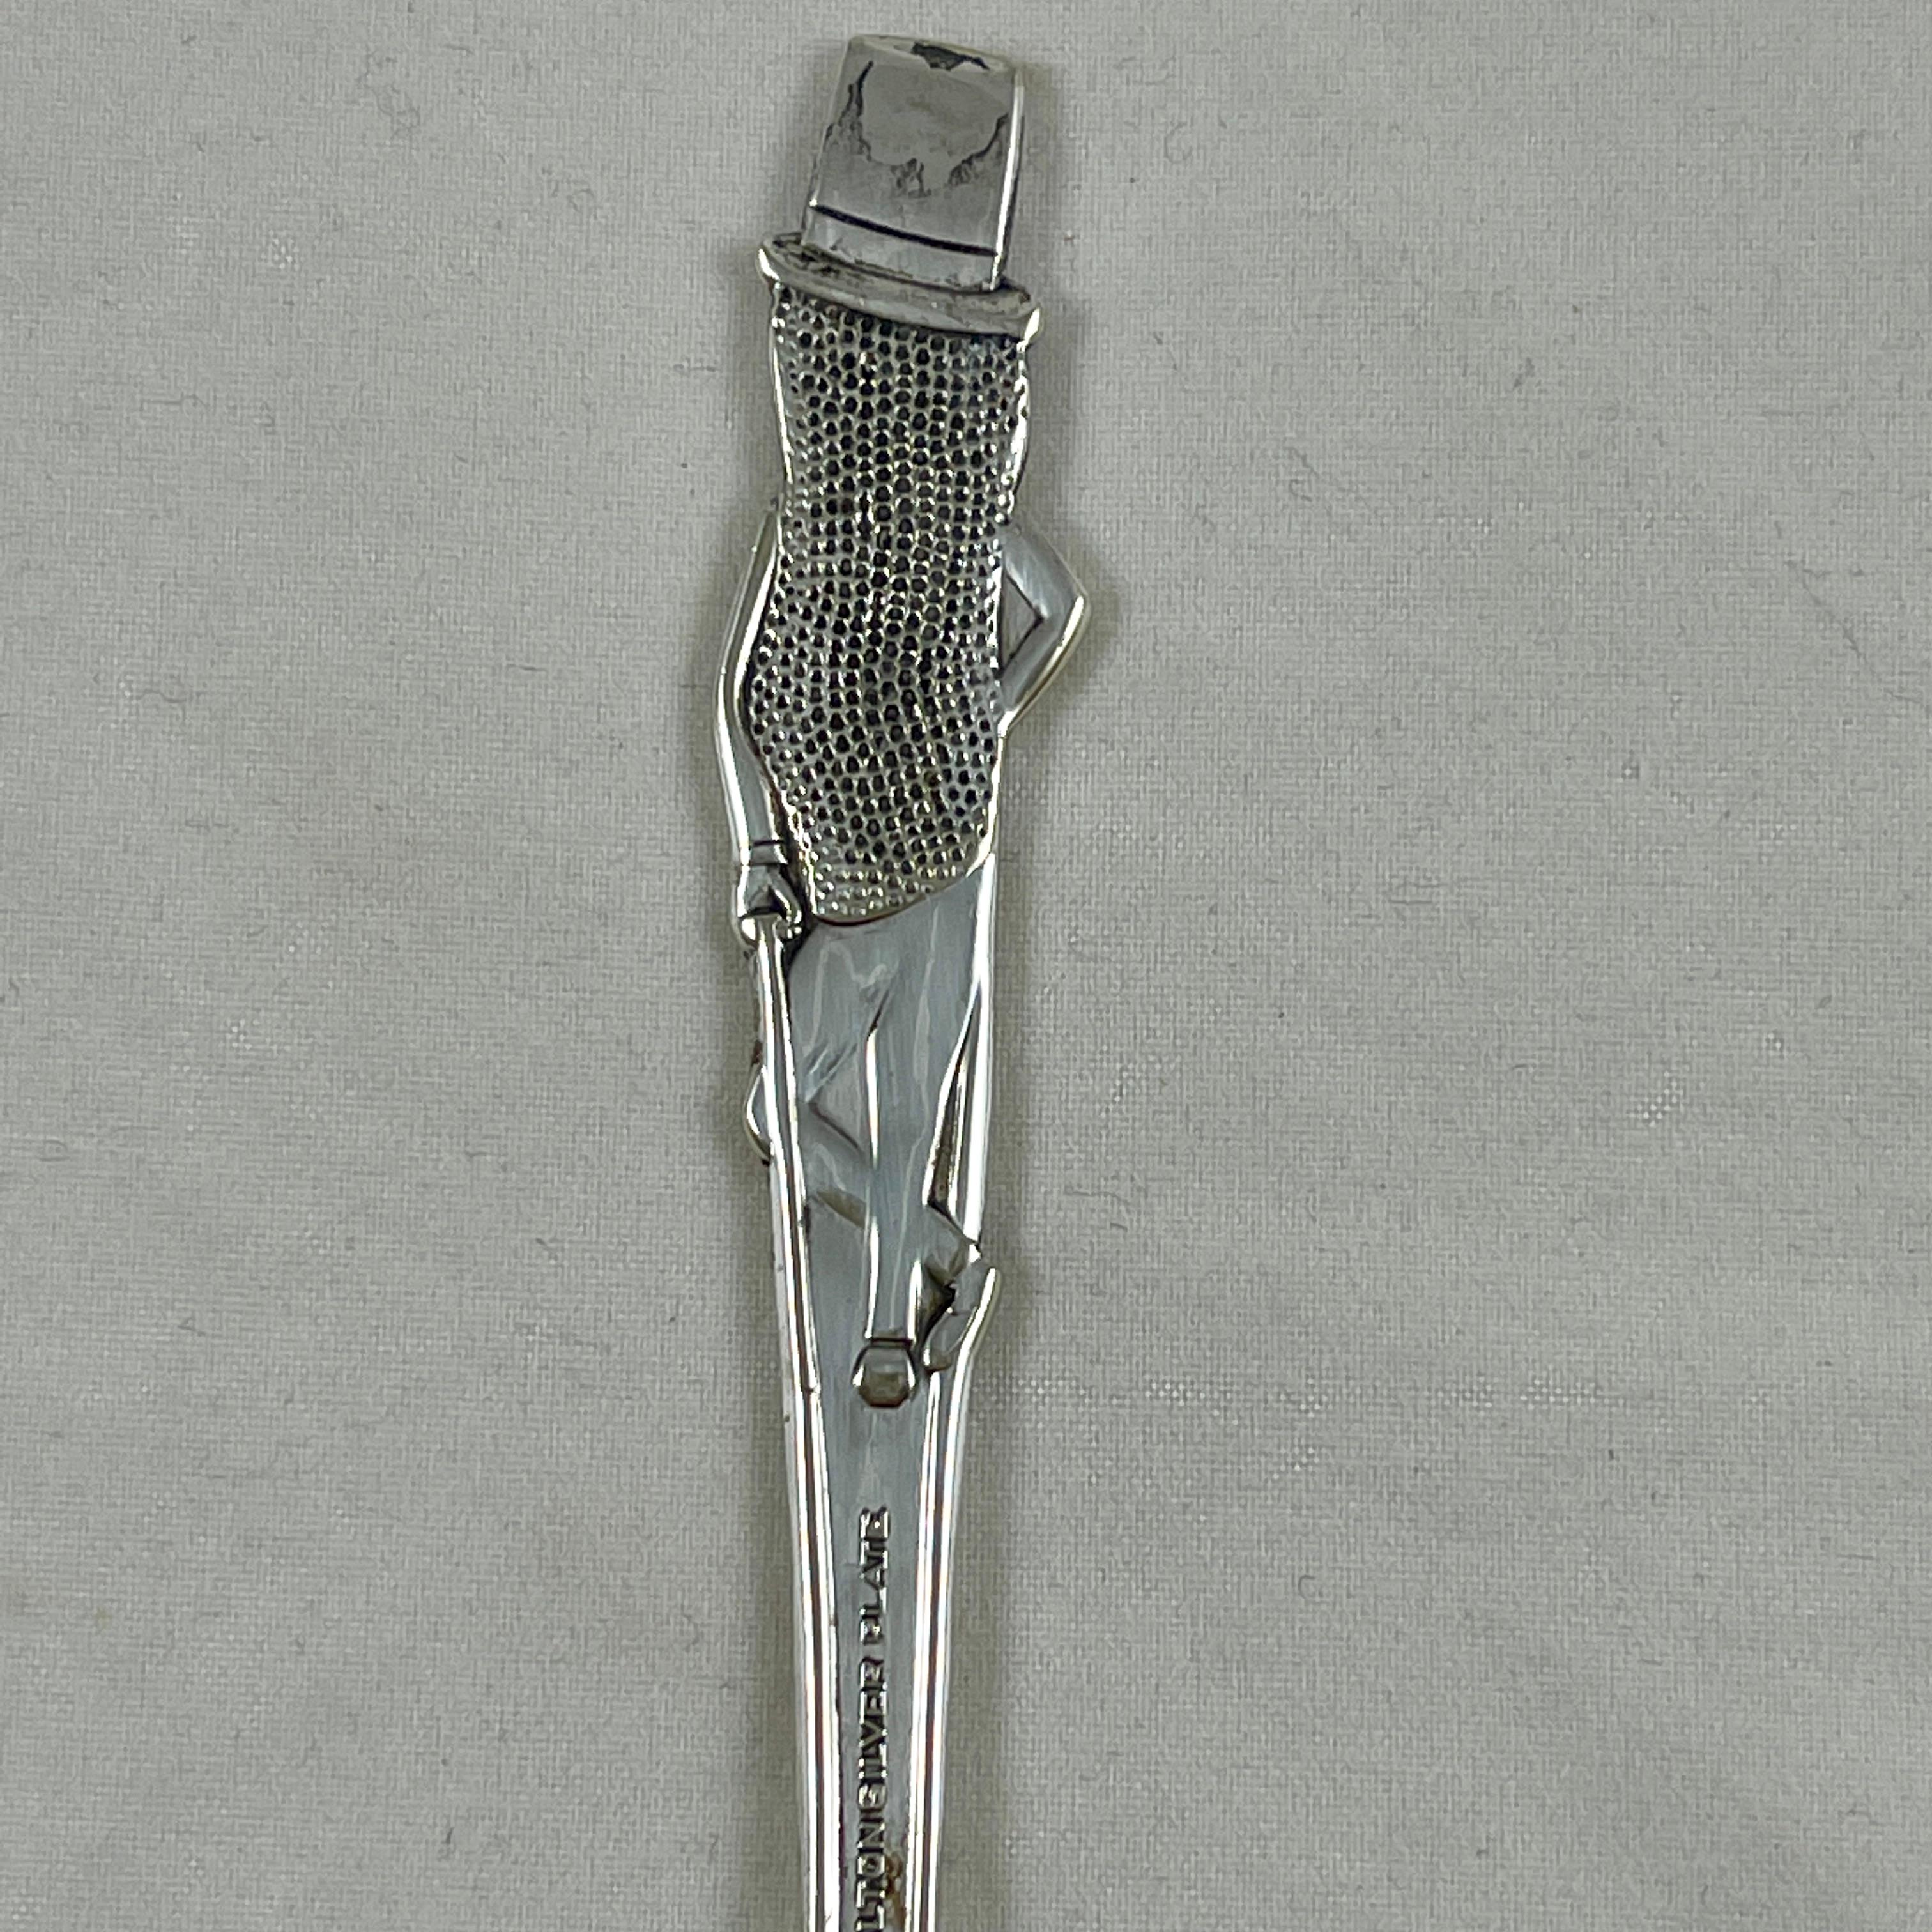 American Classical Vintage Mr. Peanut Mascot Silver Plate 1940s Advertising Nut Spoons, S/2